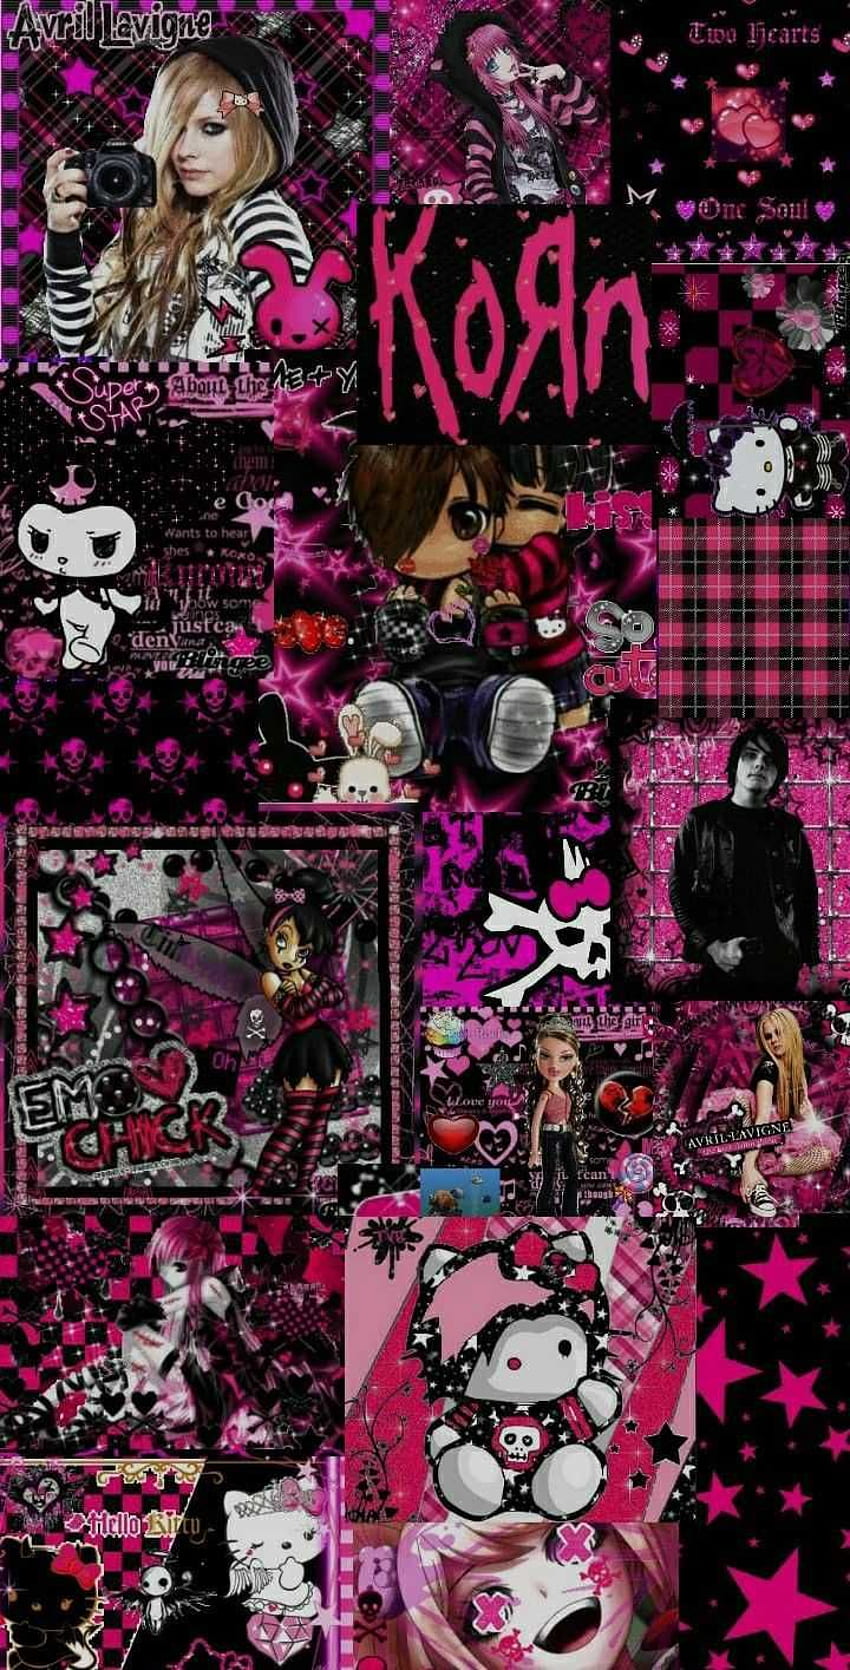 A collage of various pink and black characters - Hello Kitty, emo, gothic